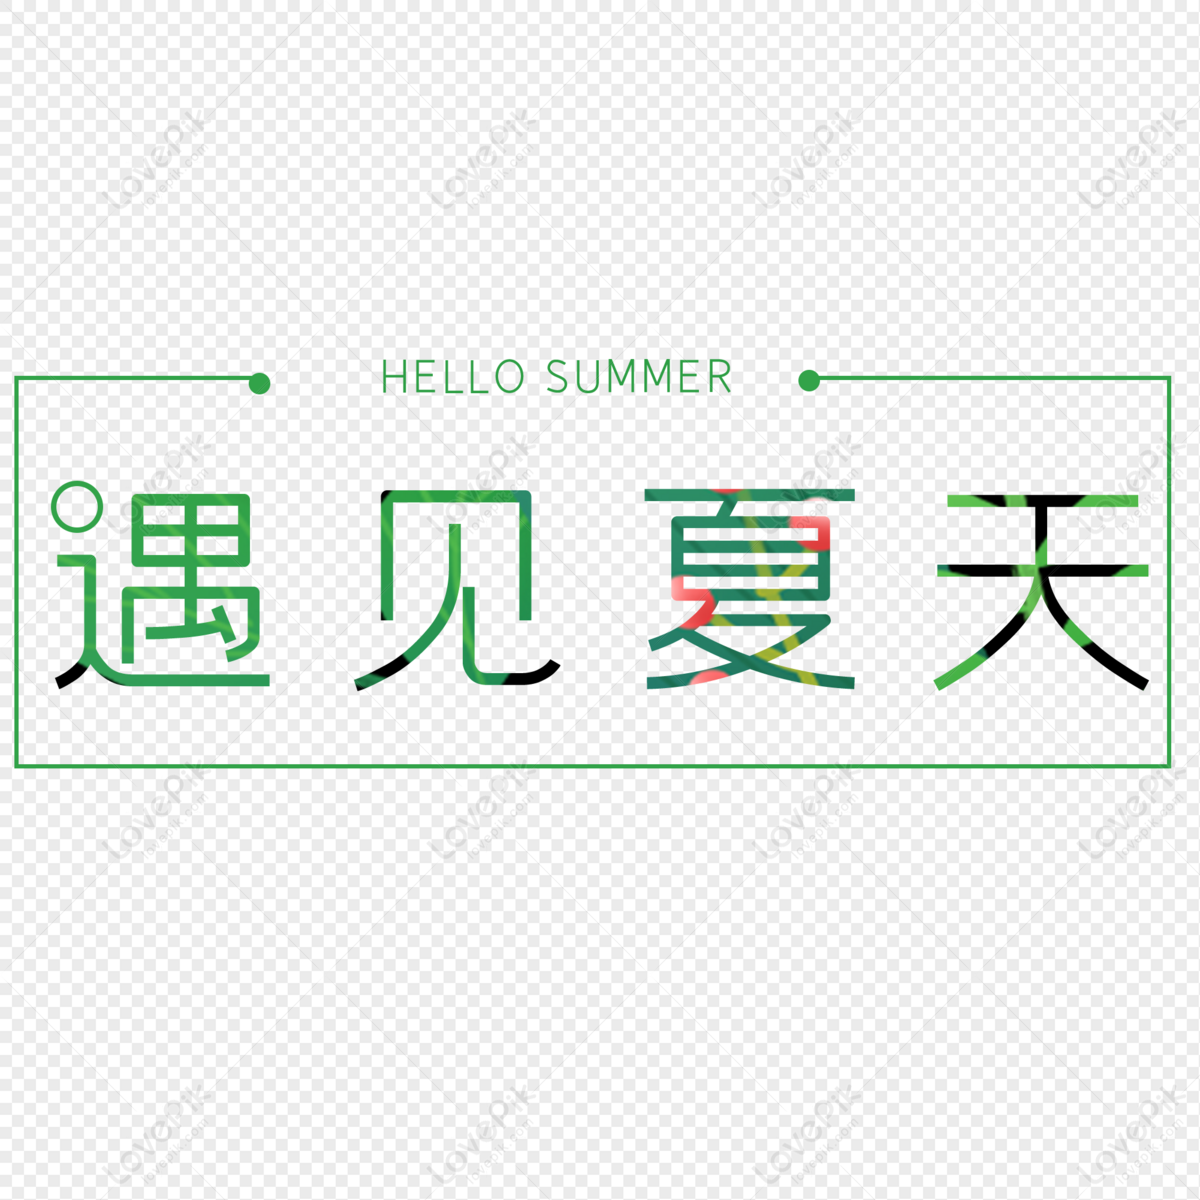 Meet The Summer Copybook Free PNG And Clipart Image For Free Download ...